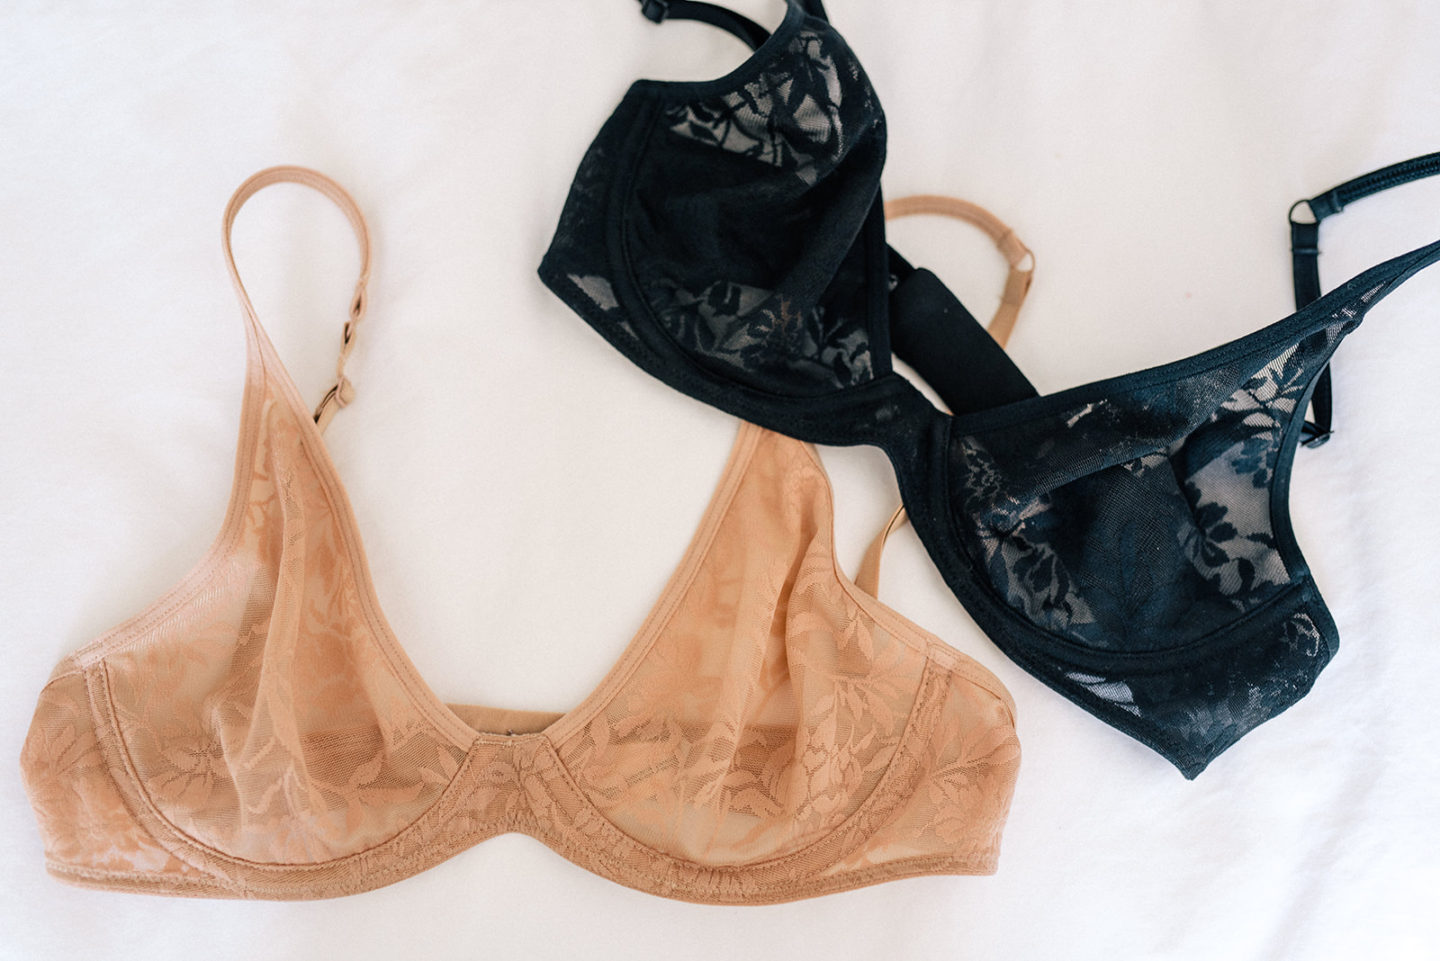 Shop GapBody Bras and Bralettes For Women